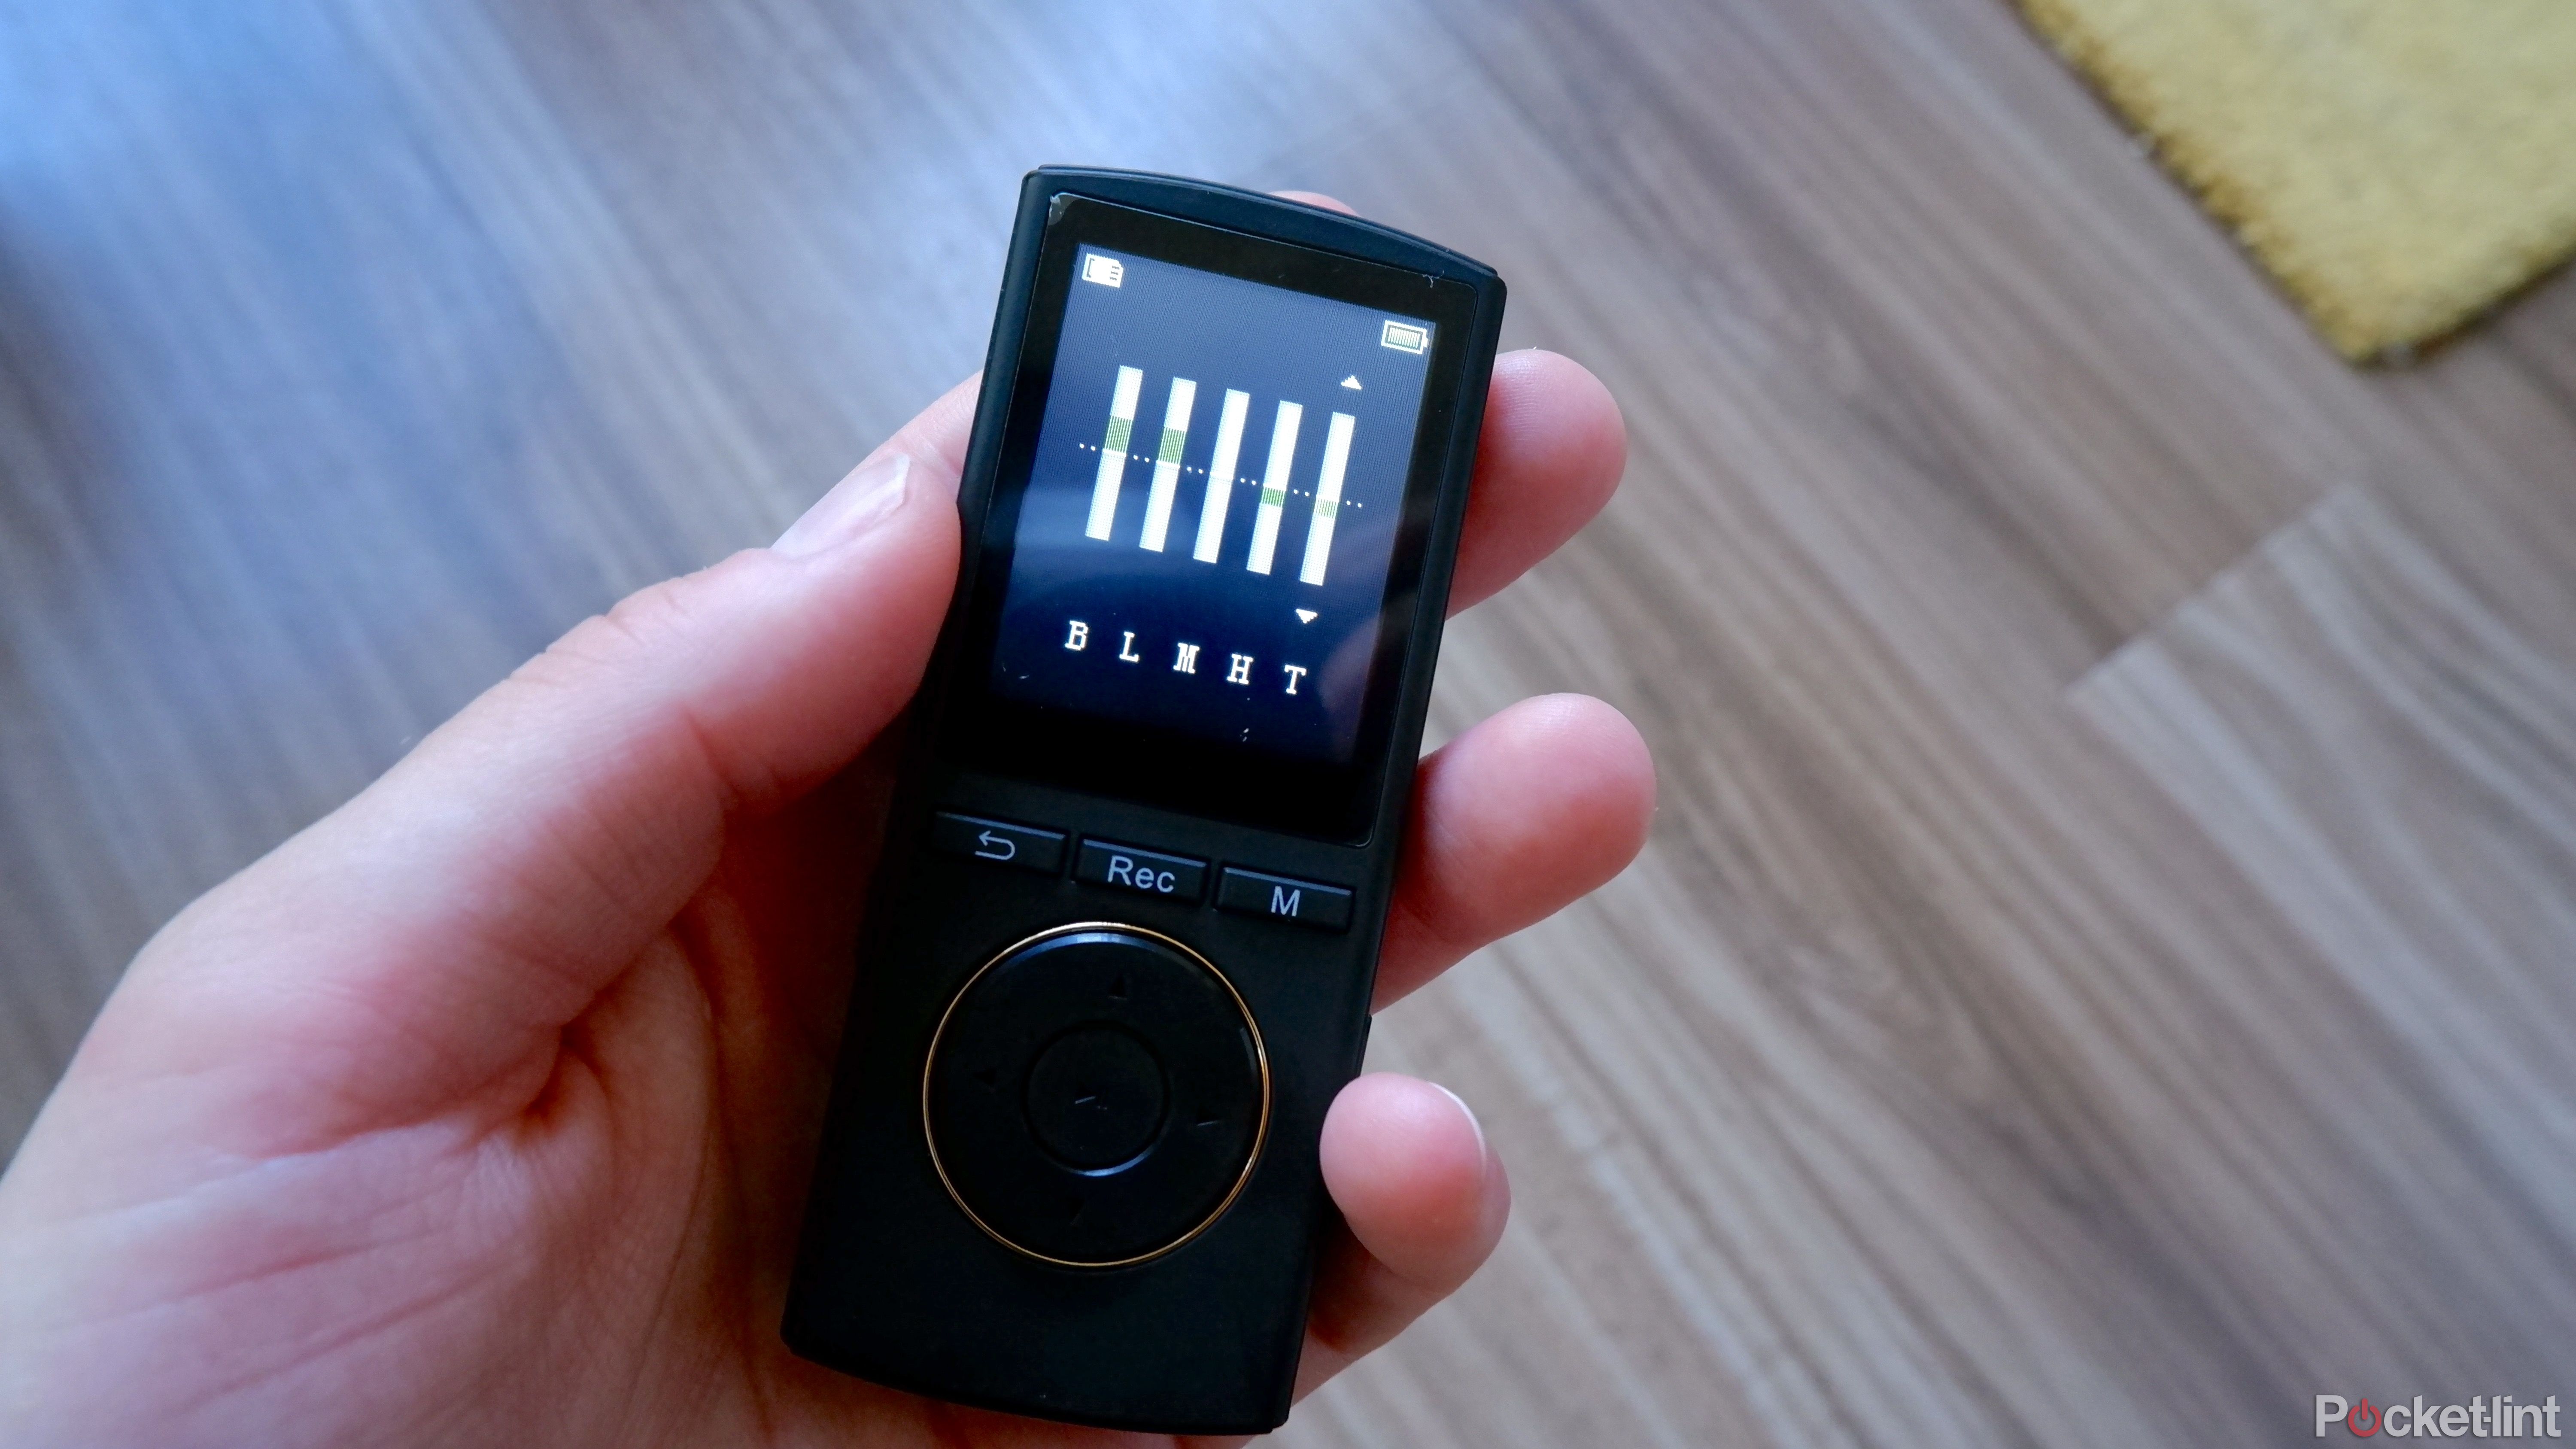 The Safuciiv MP3 player with the equalizer open